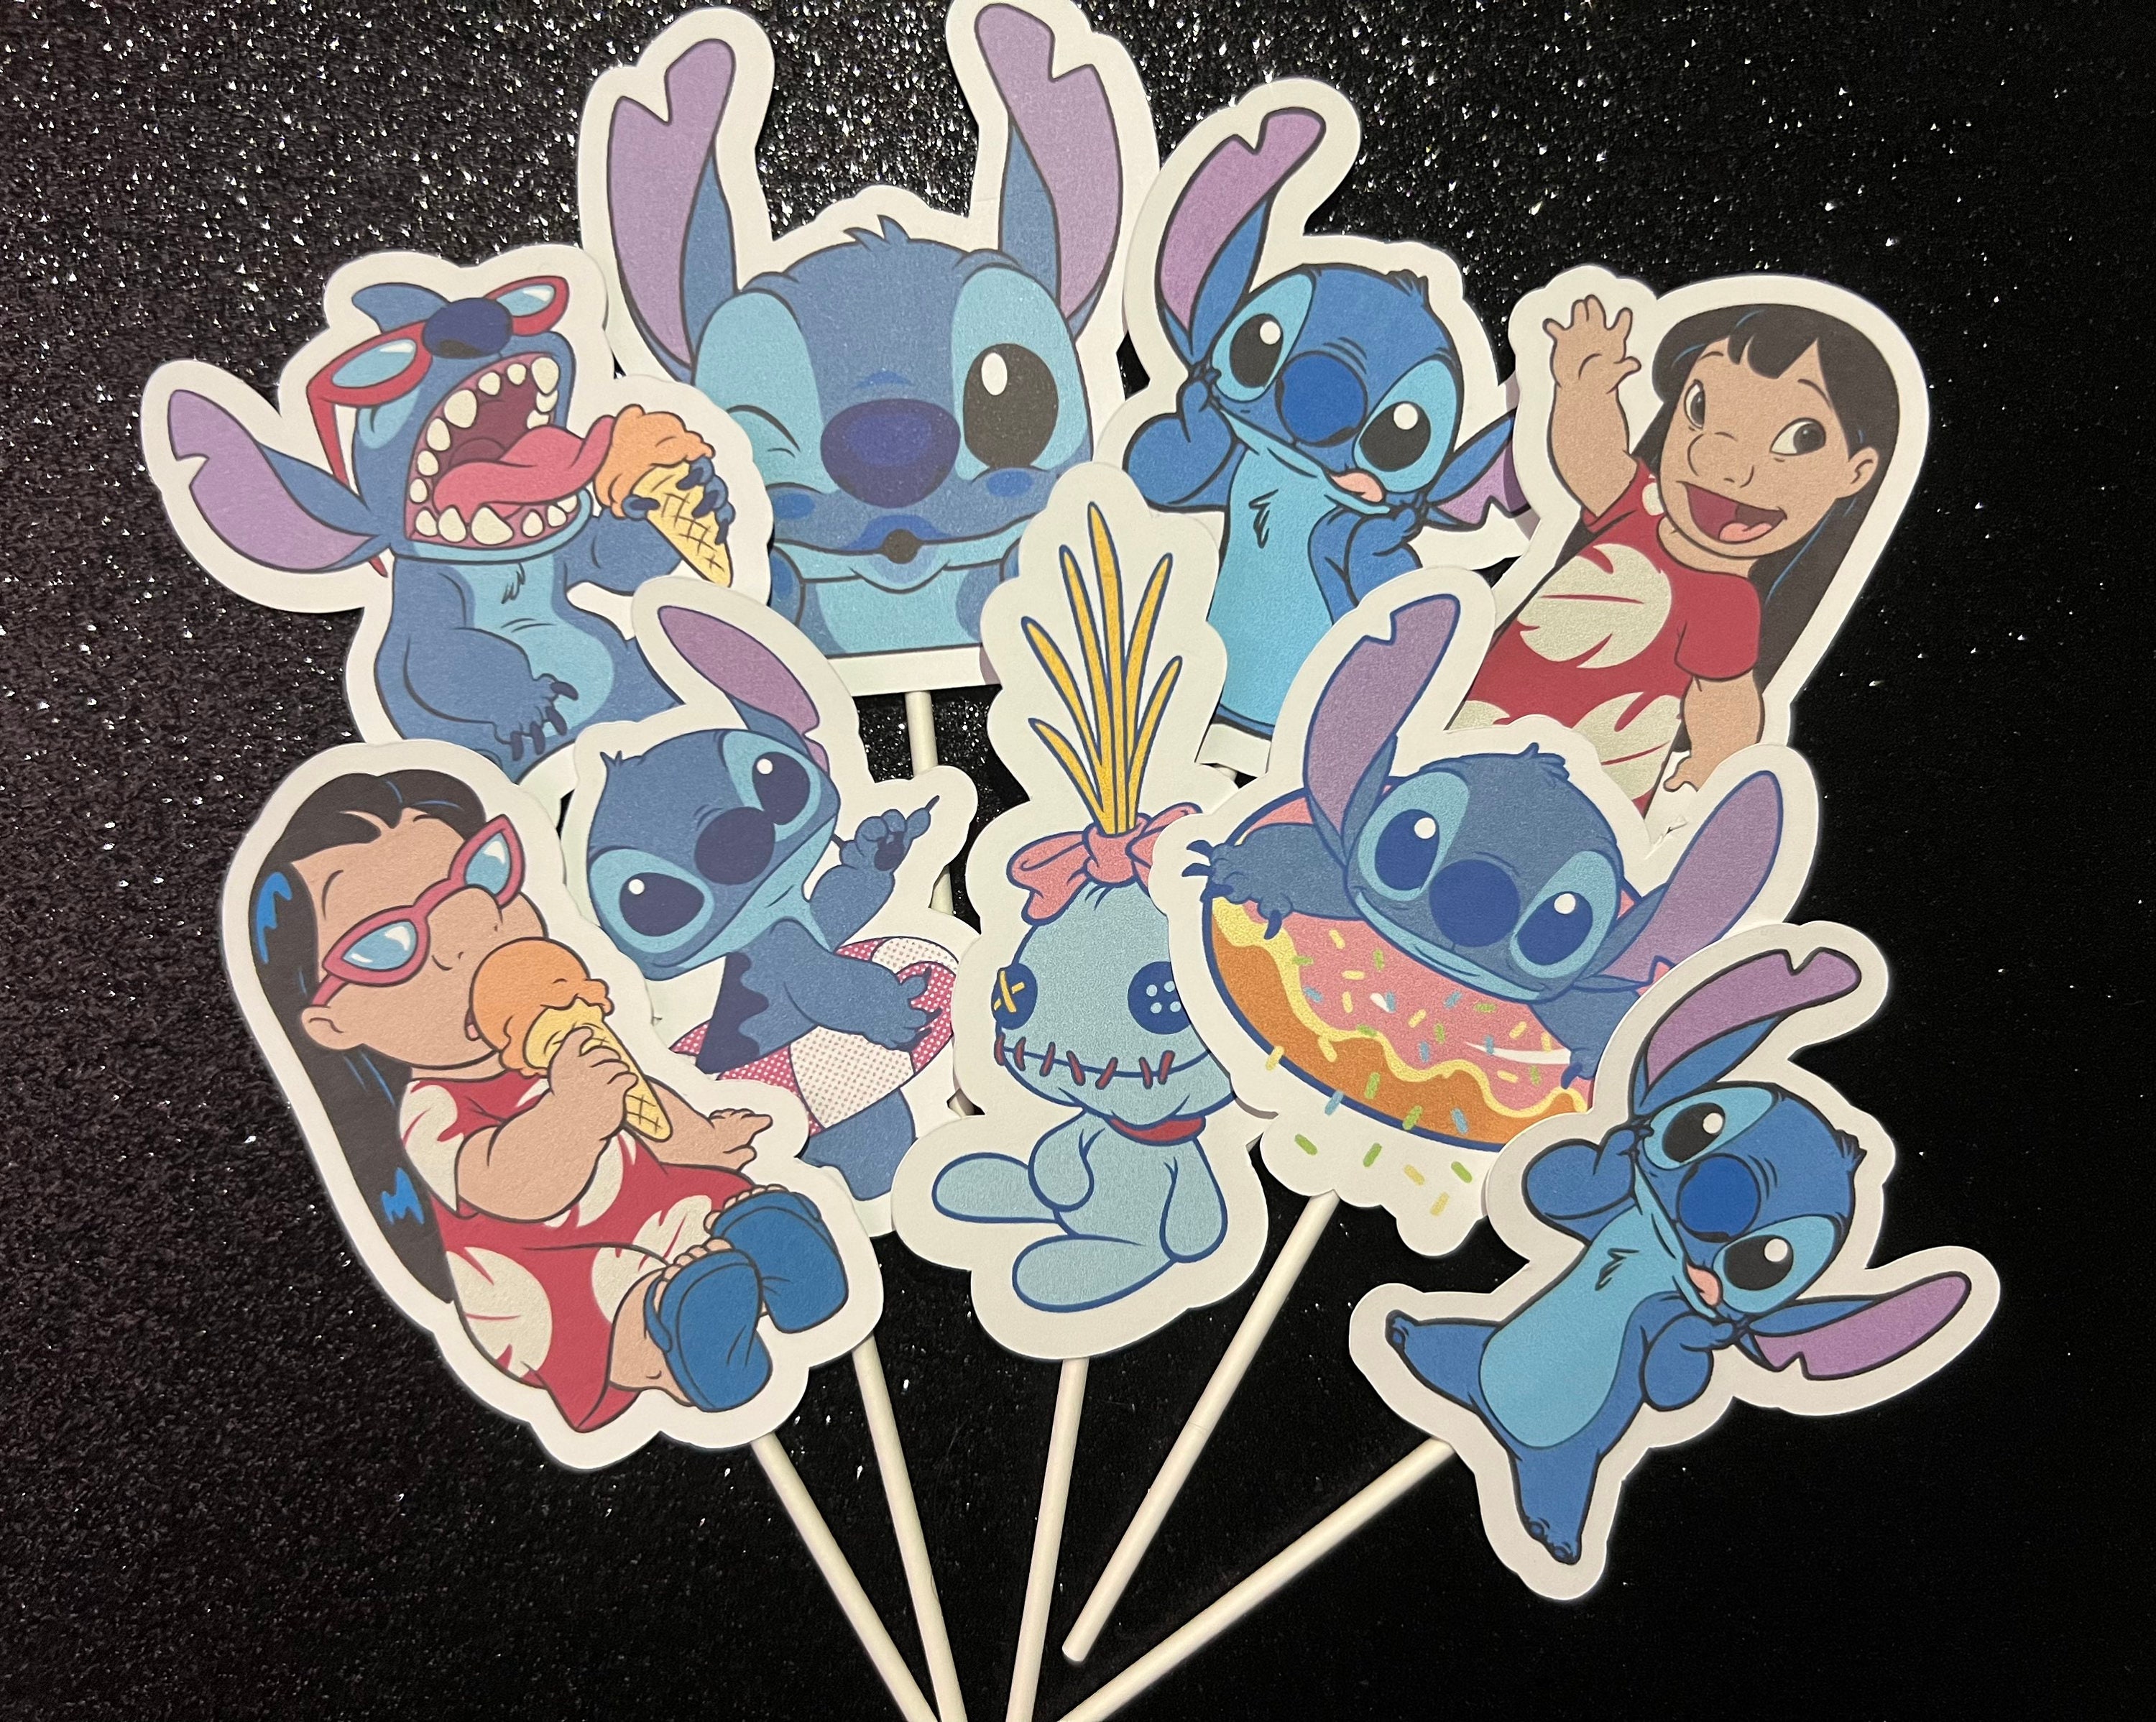 Lilo and Stitch Party Favor/Gift/Goodie Bags by PartyRockinEvents